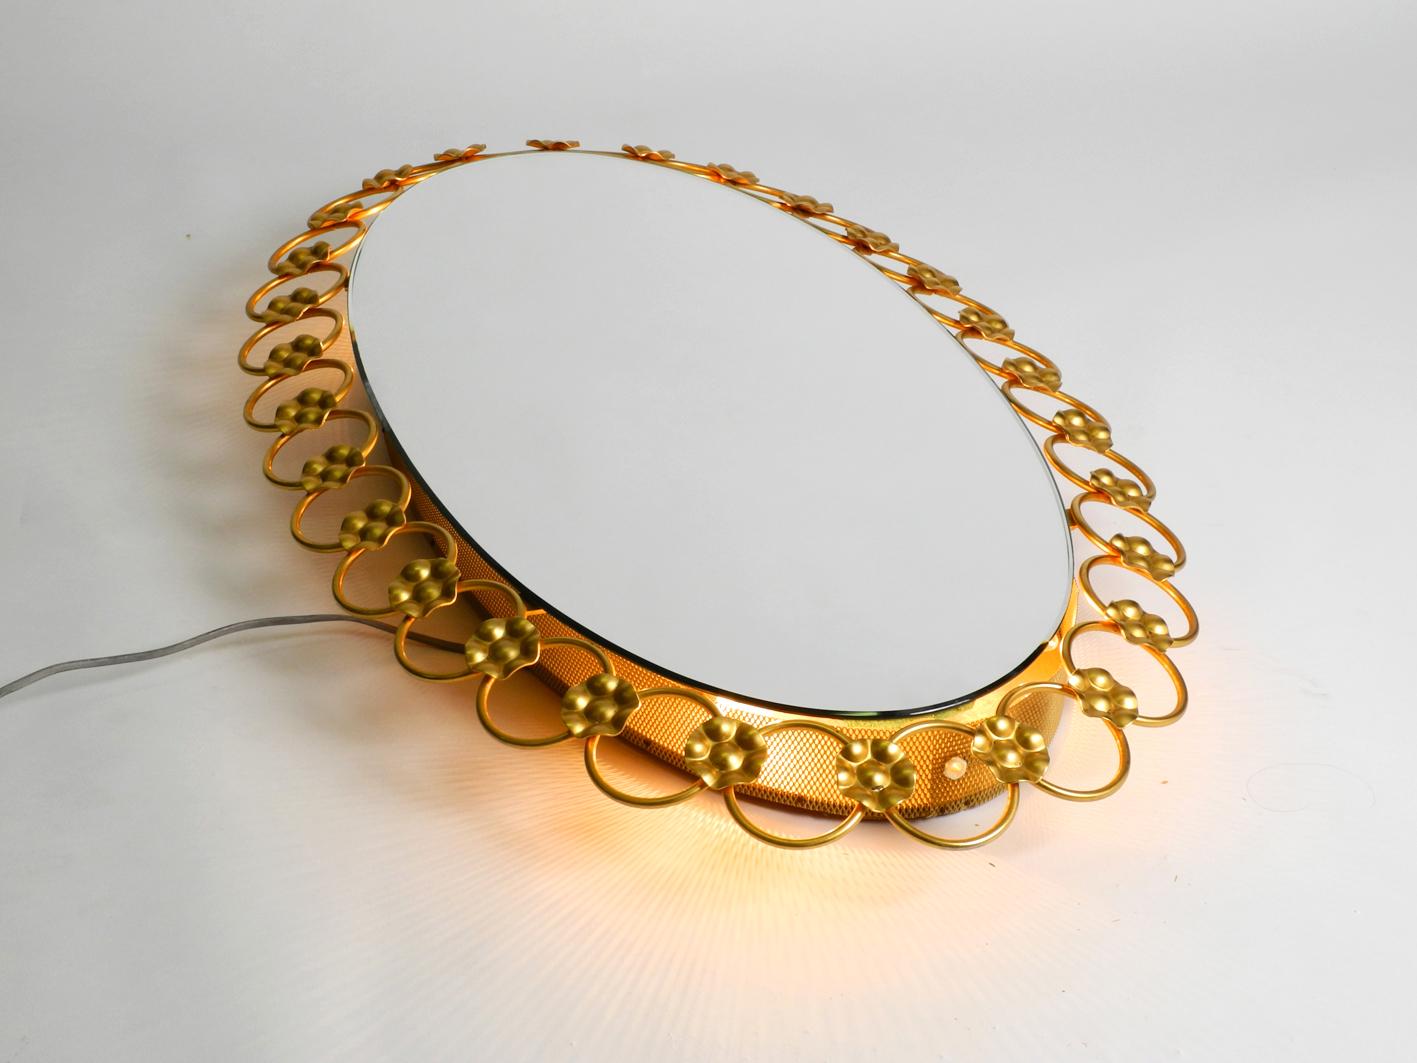 German Illuminated Oval 1960s Large Wall Mirror with a Brass Frame For Sale